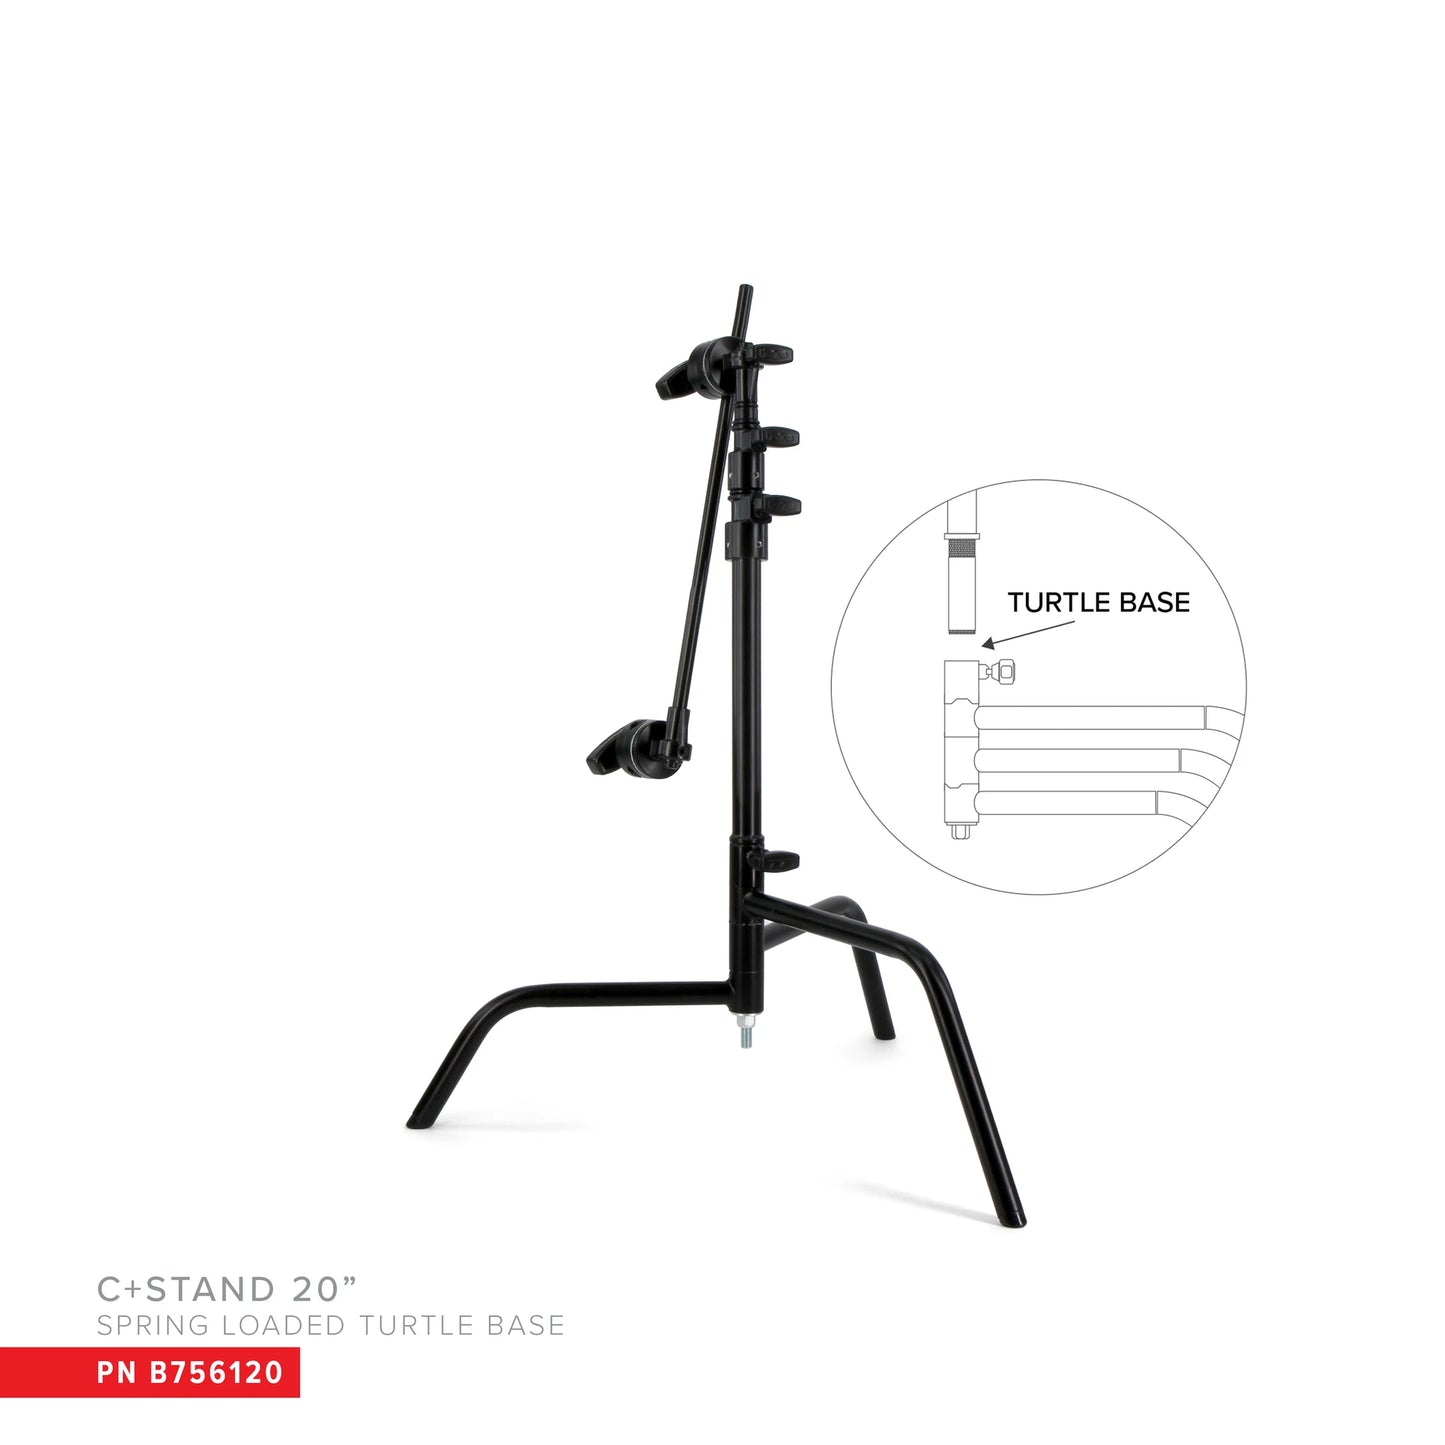 Matthews 20" C-Stand with Spring Loaded Turtle Base + Grip Arm and Head